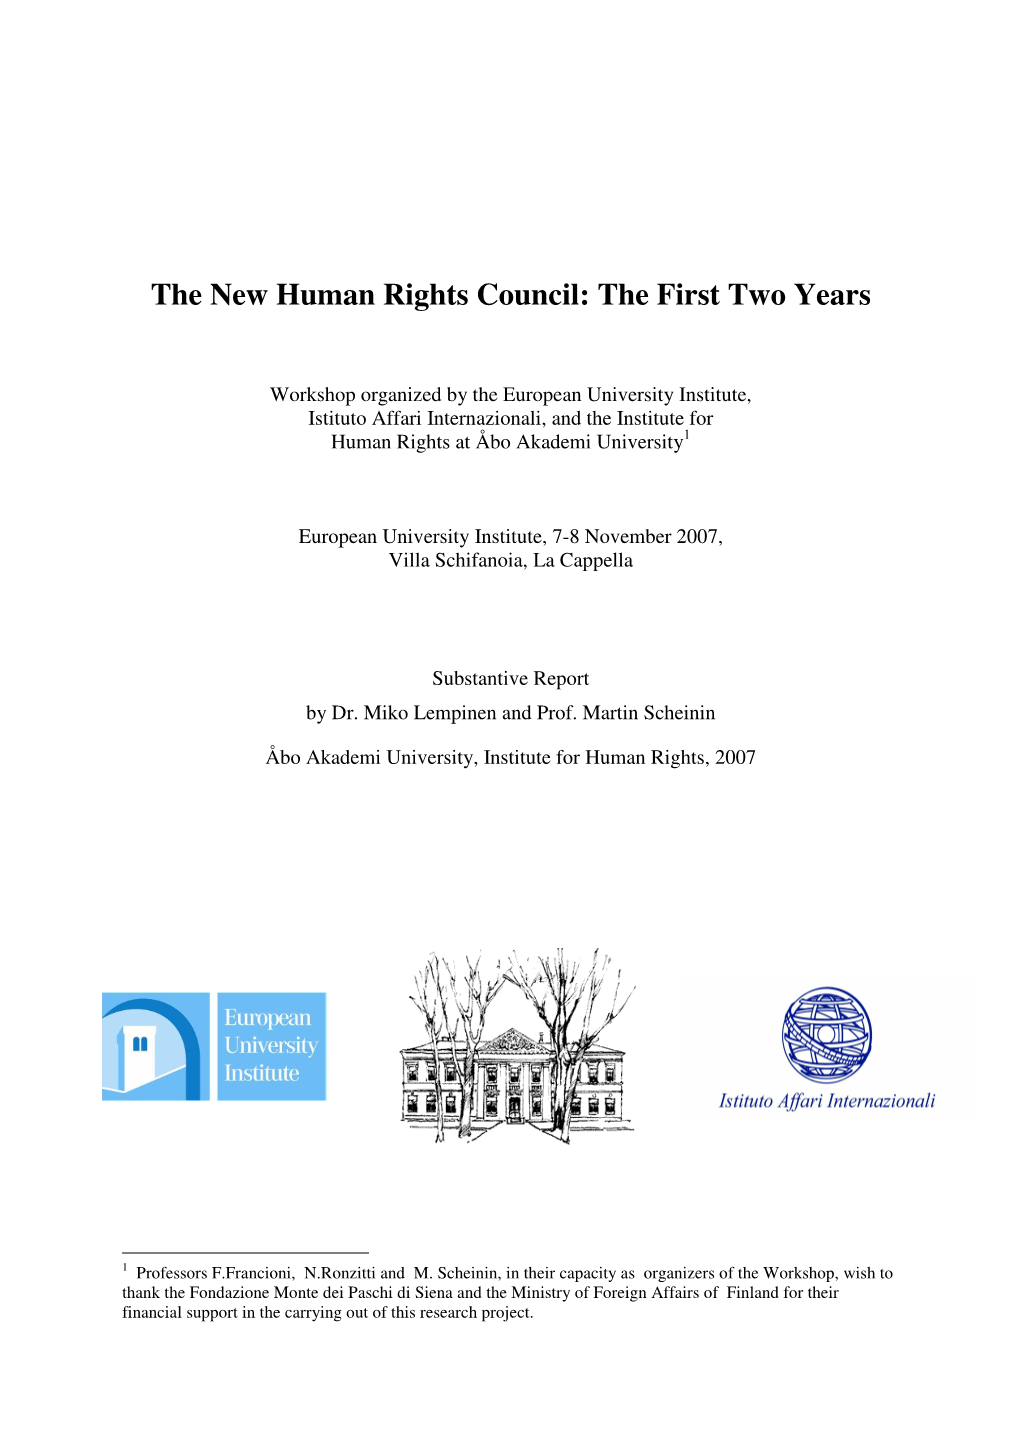 The New Human Rights Council: the First Two Years